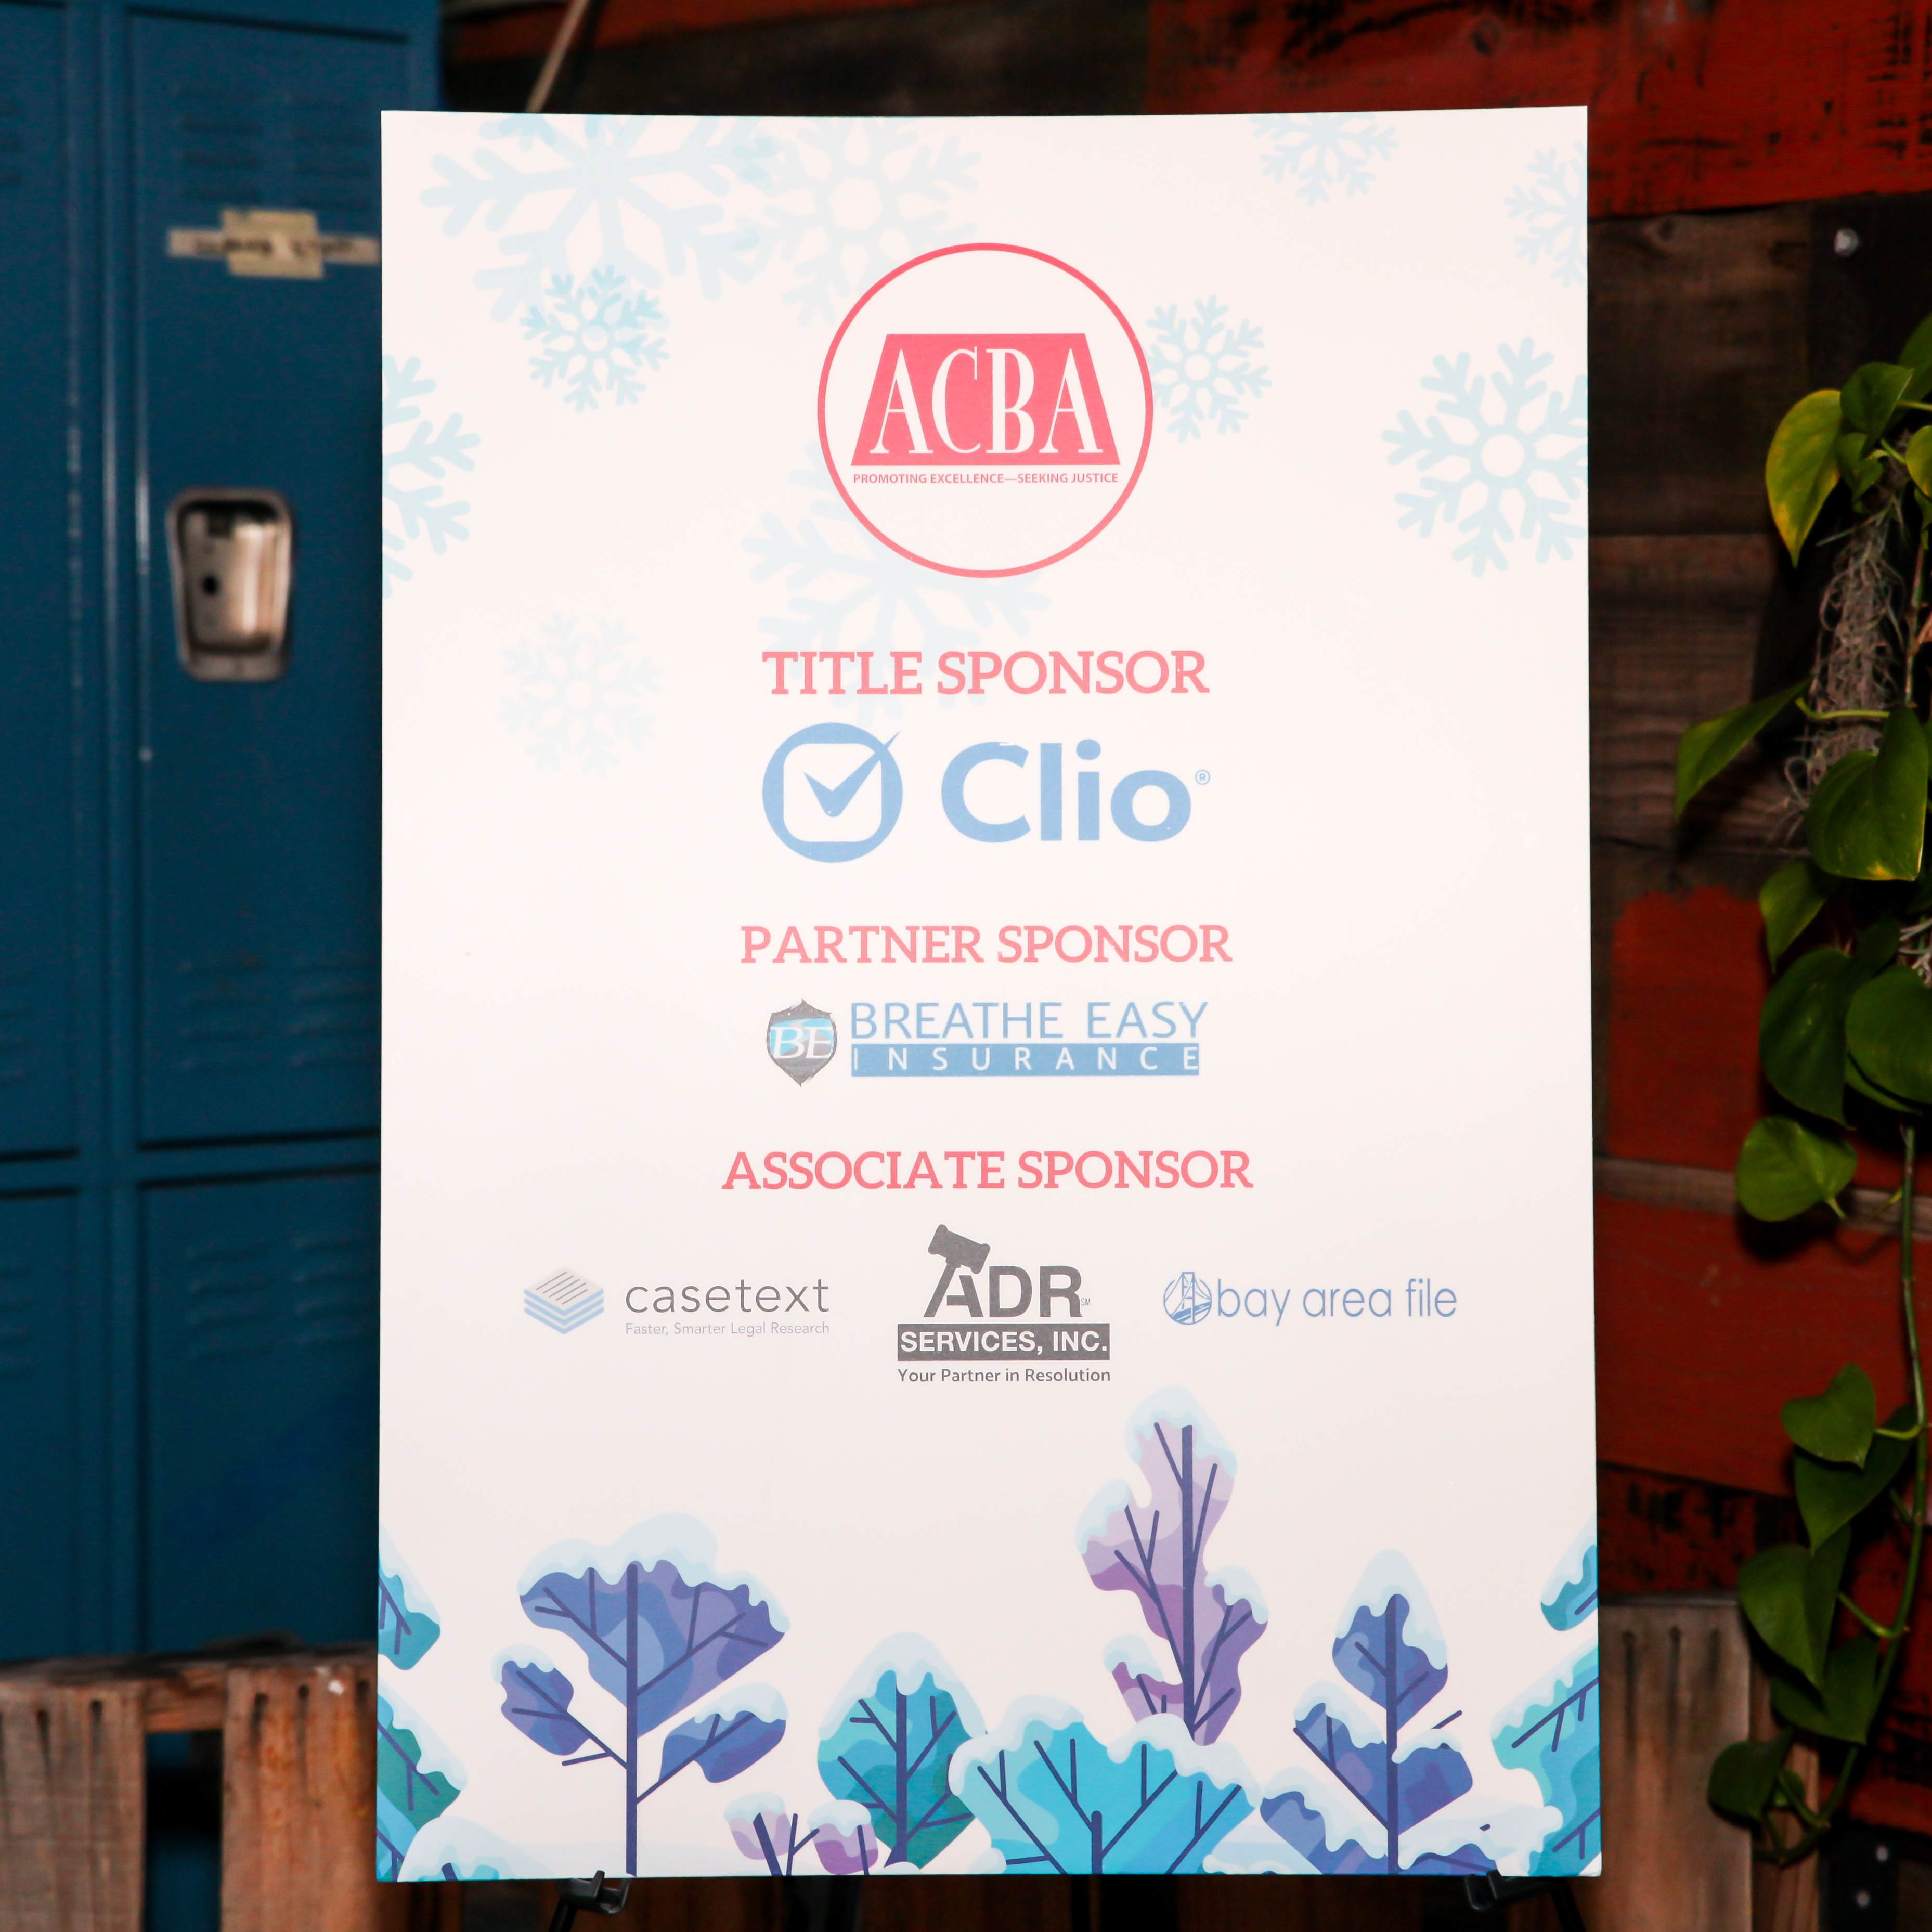 Winter Reception Sponsors Clio, Breathe Easy Insurance, Casetext, ADR Services, Inc., and Bay Area File